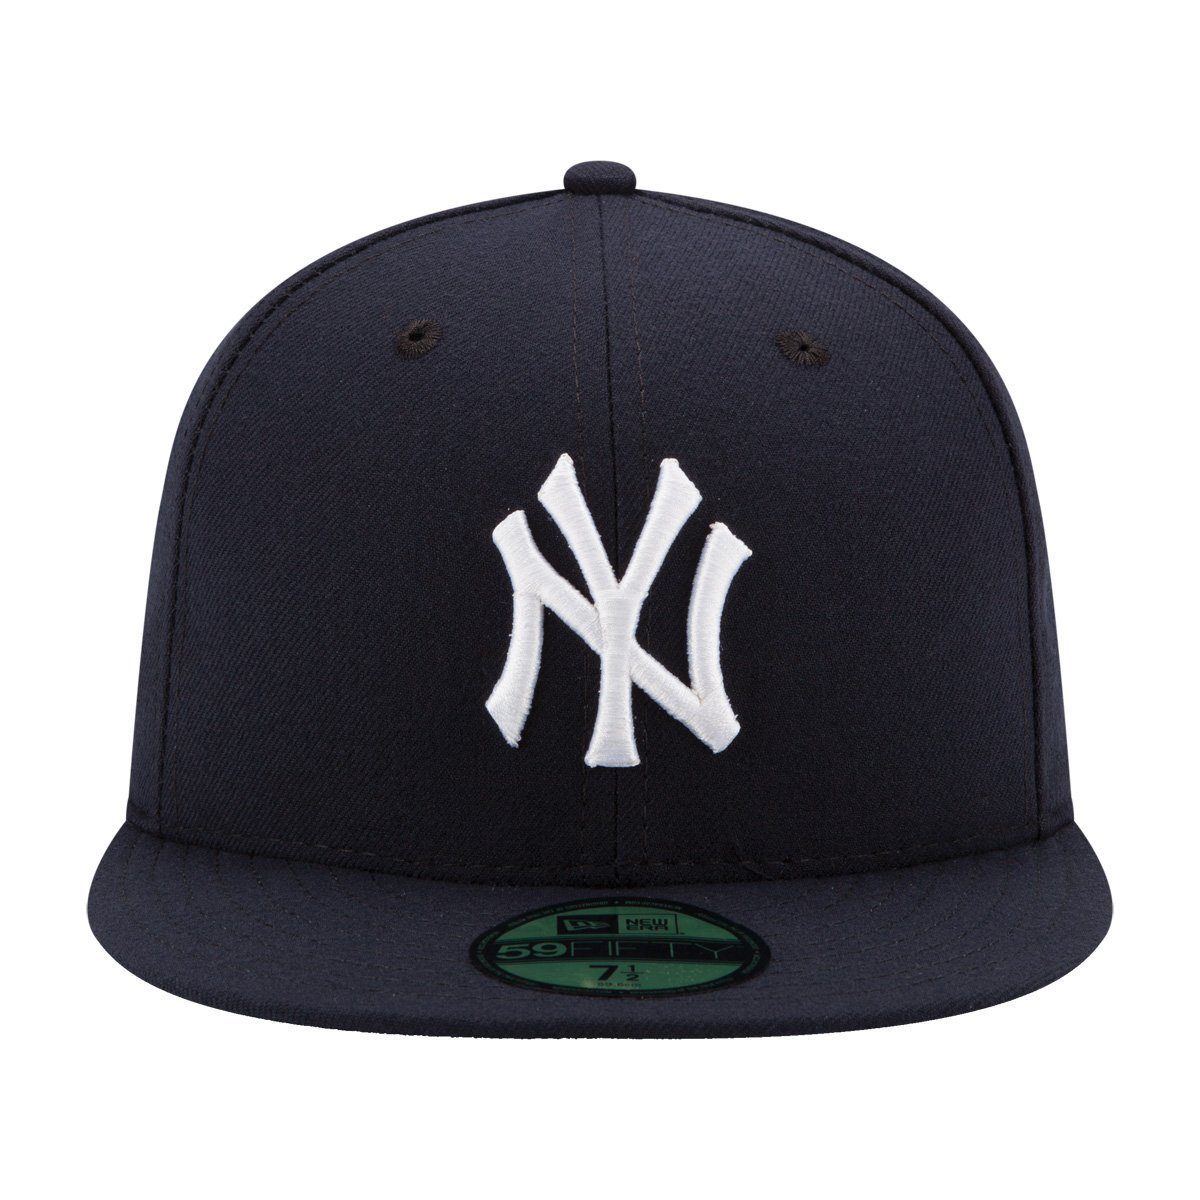 York Yankees AUTHENTIC Fitted Cap Era 59Fifty New New ONFIELD